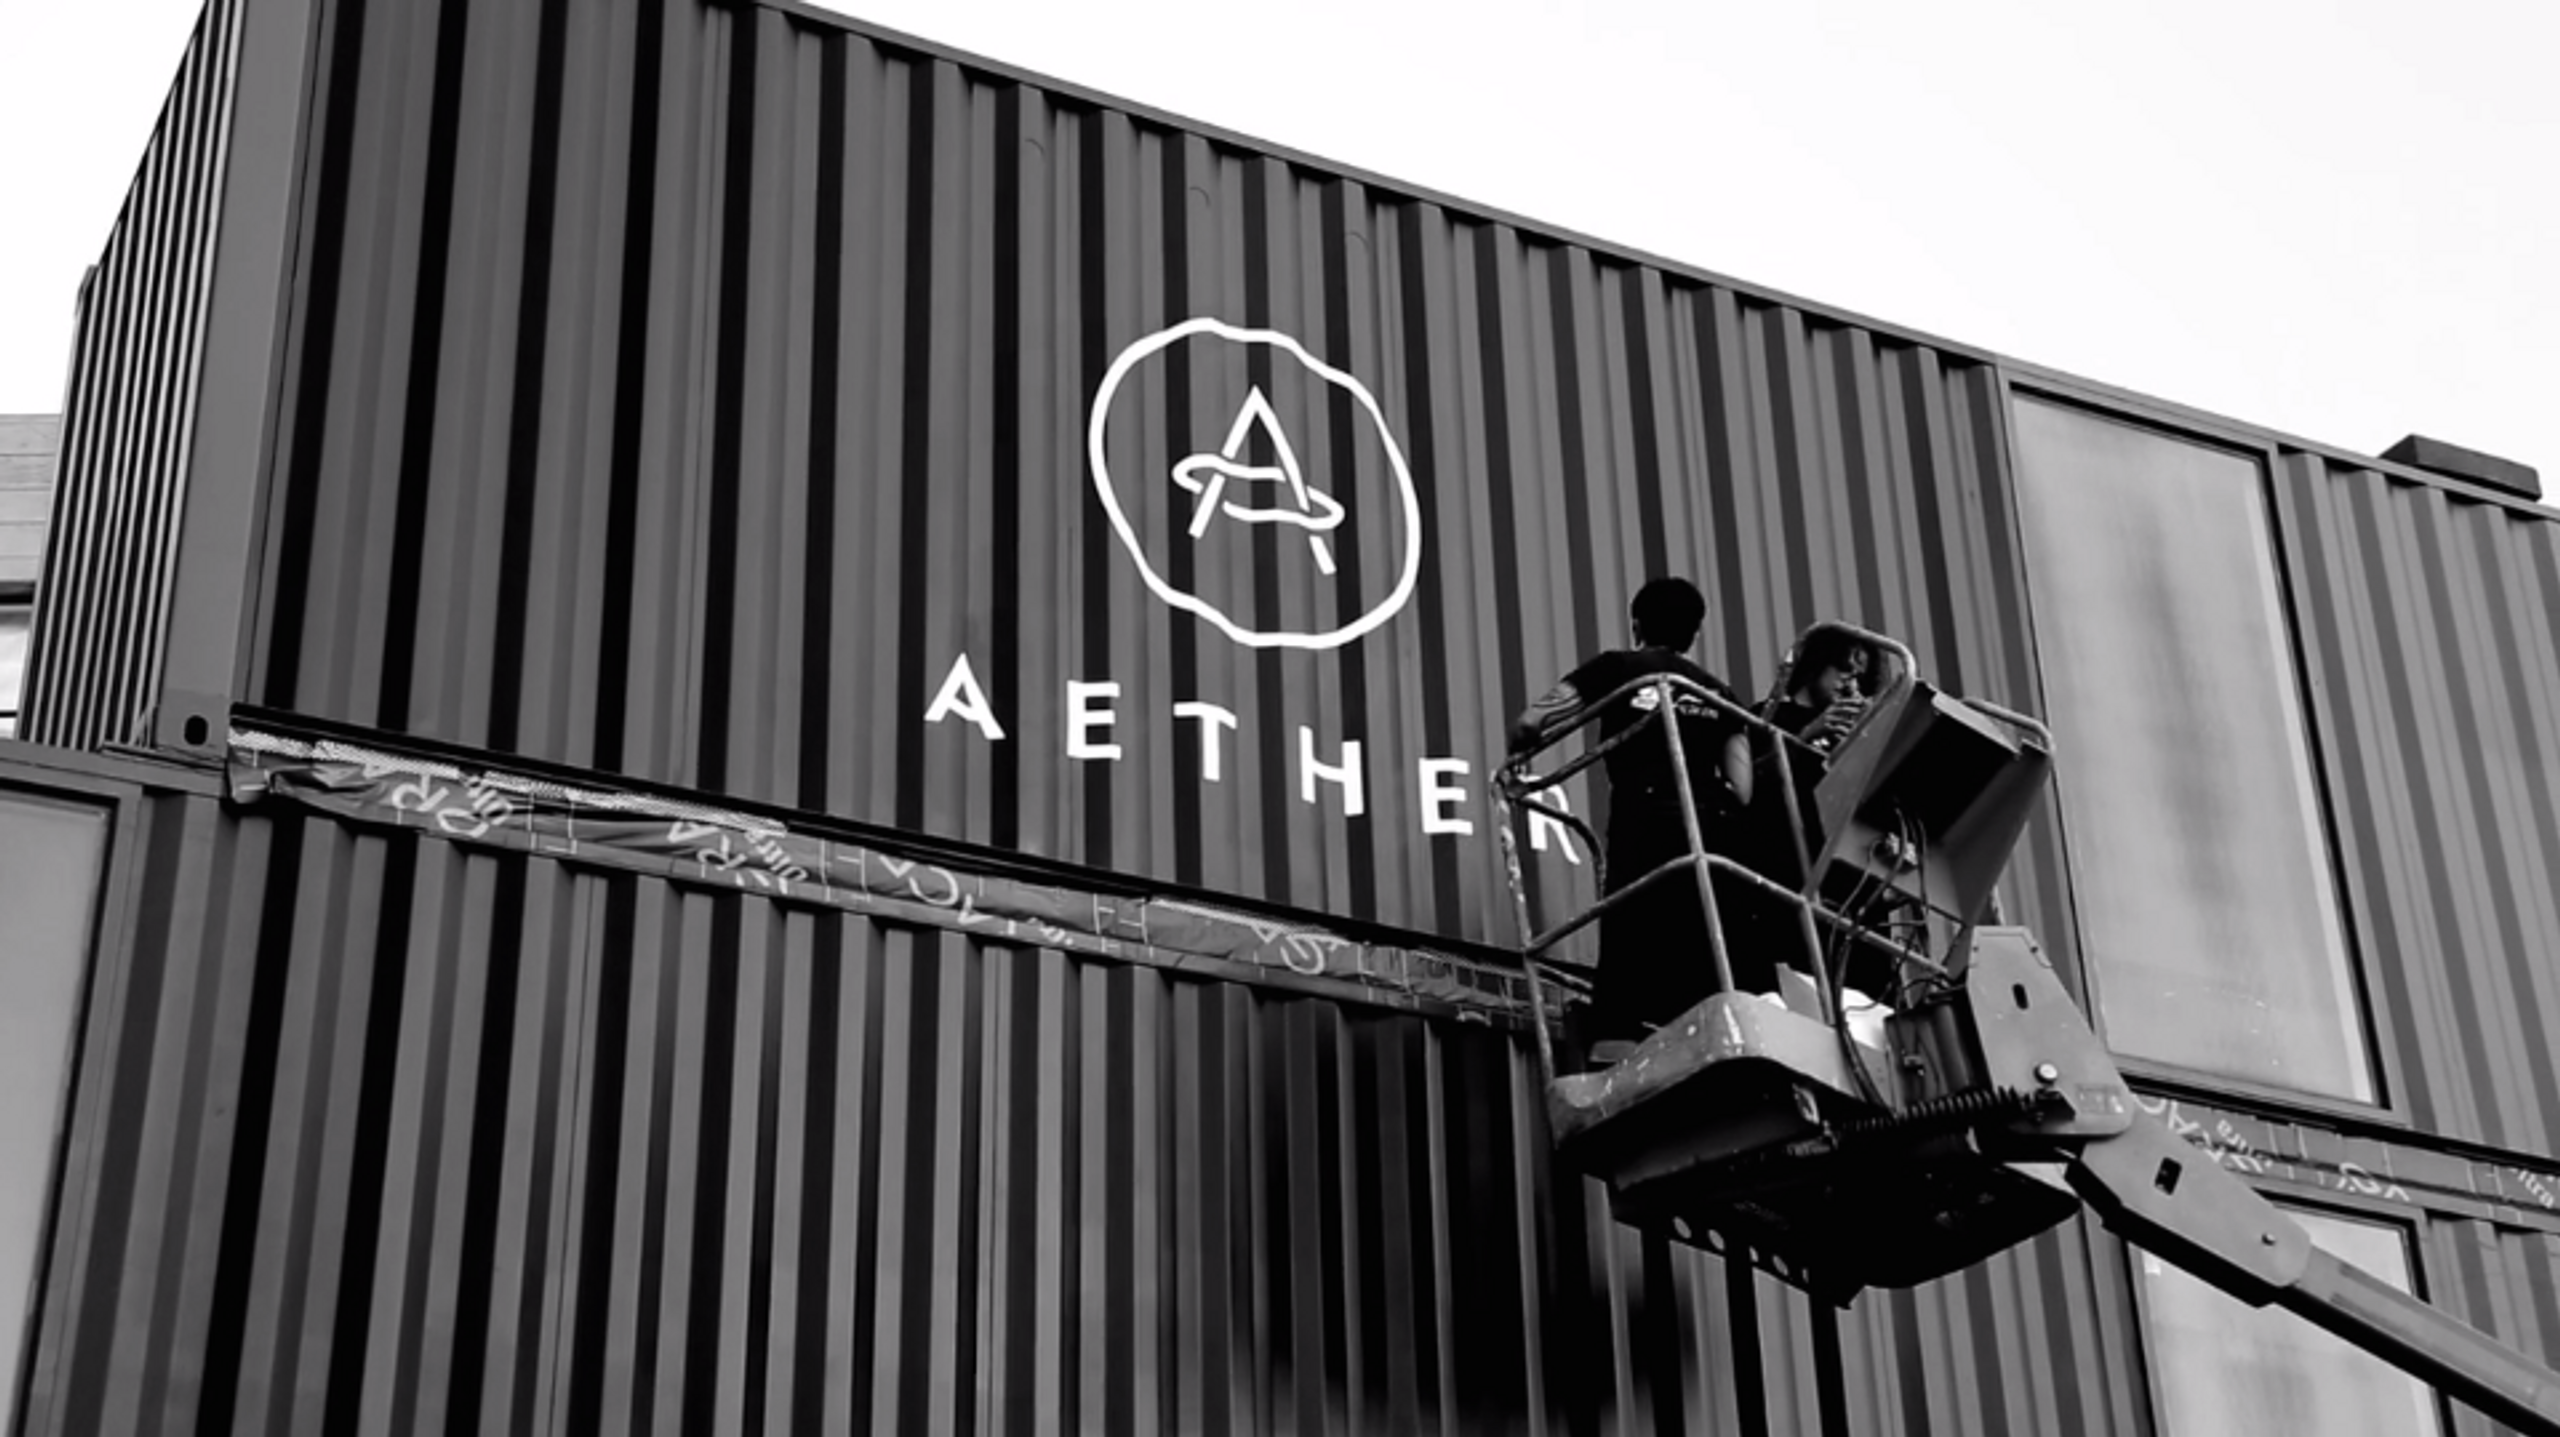 AETHER store in san francisco